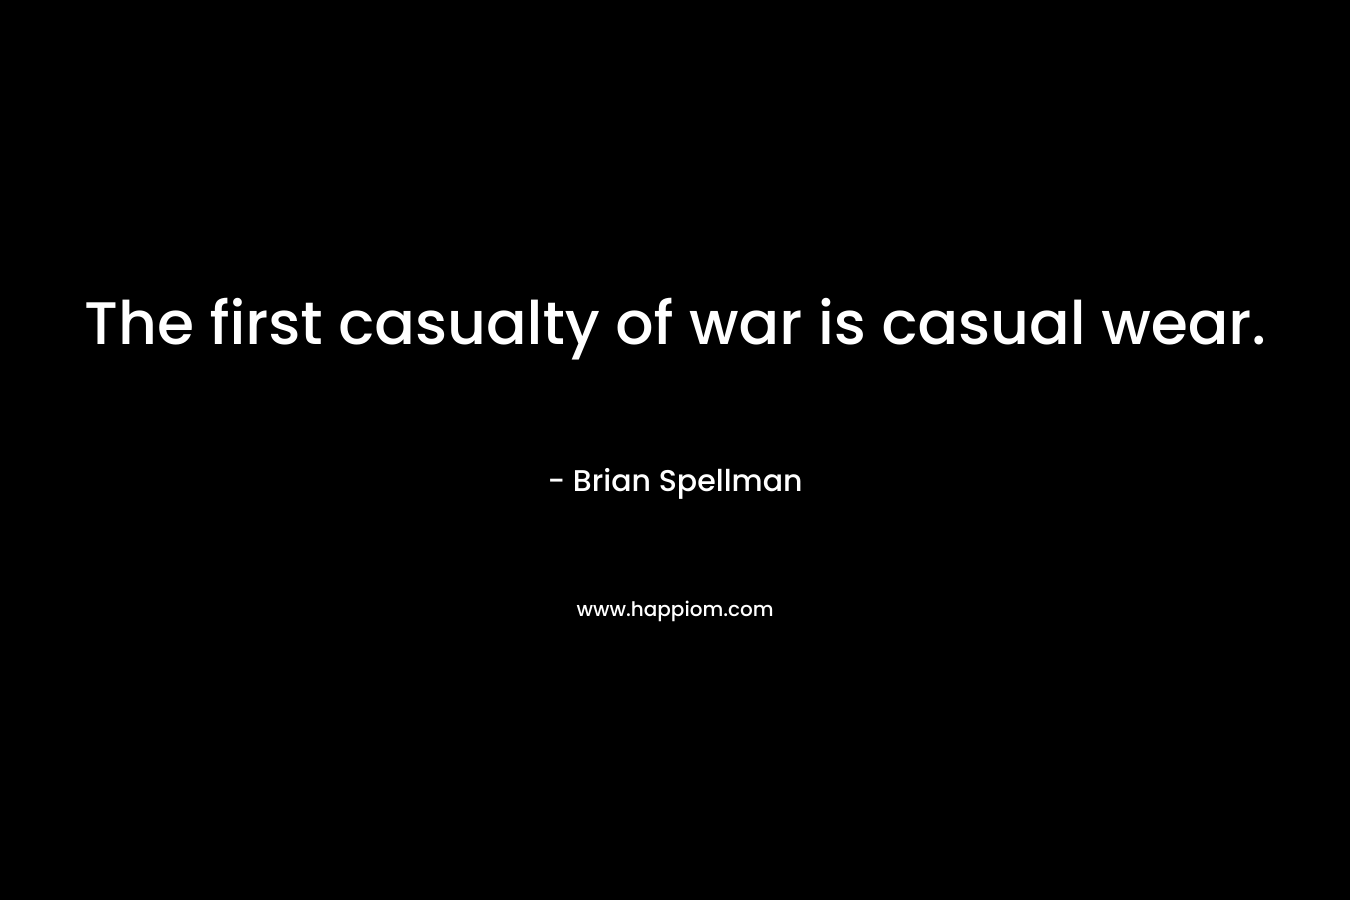 The first casualty of war is casual wear. – Brian Spellman